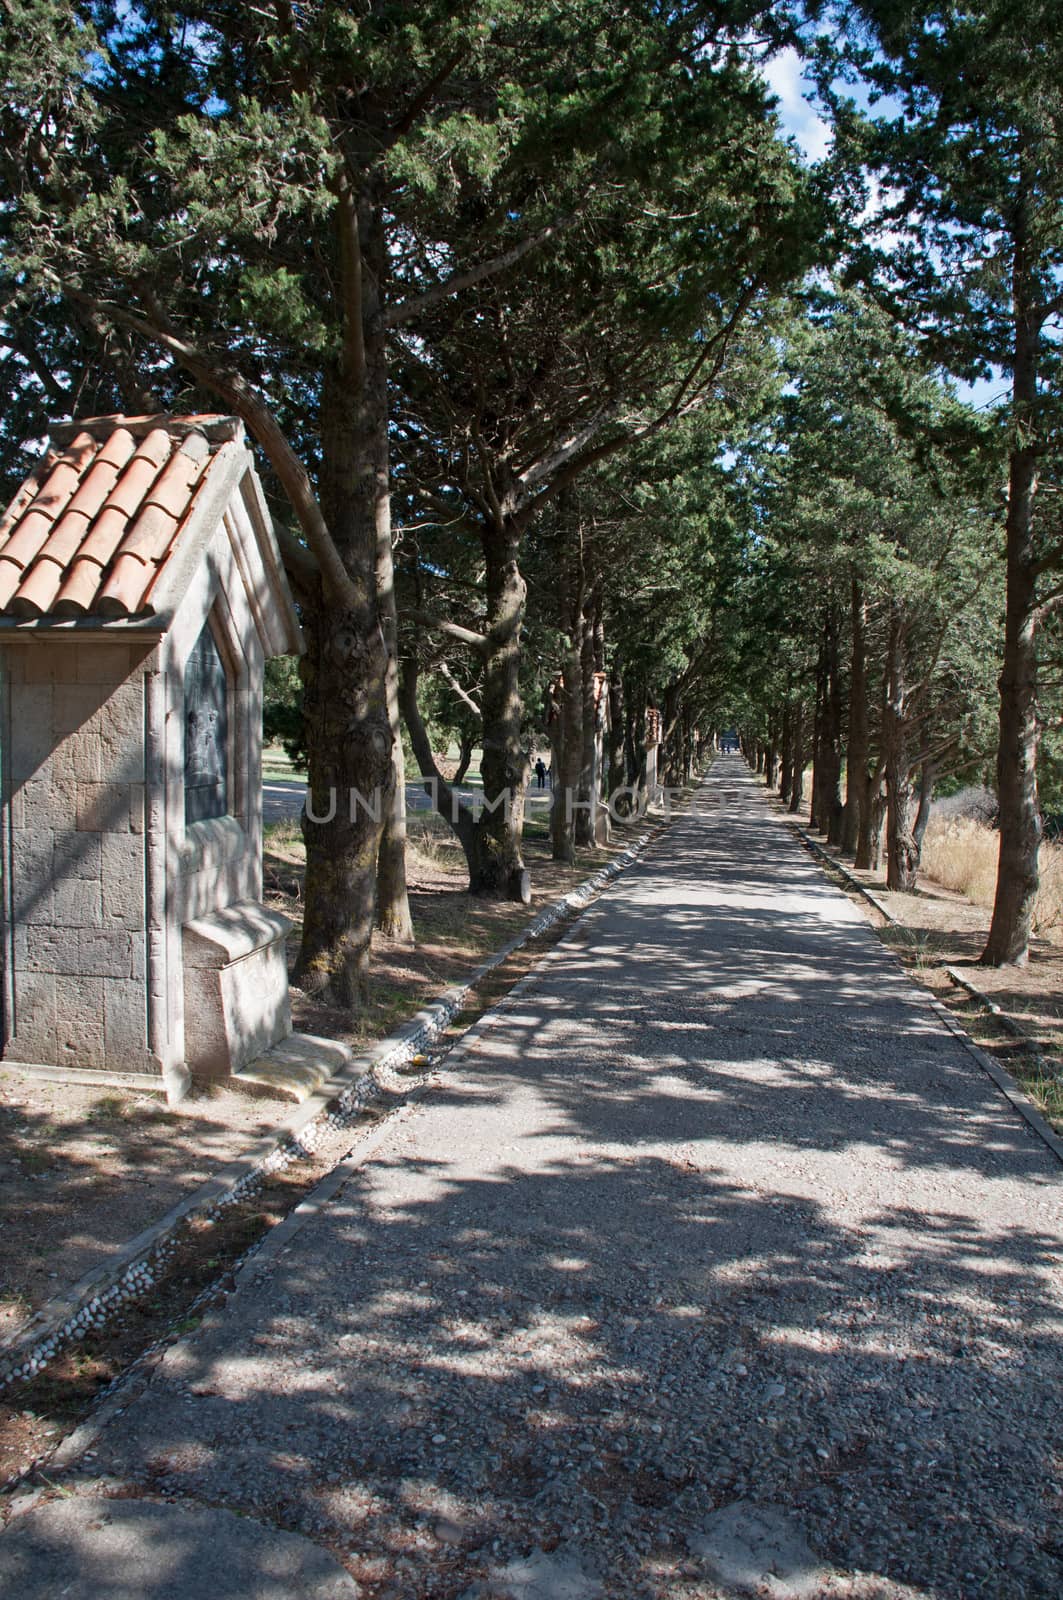 Calvary avenue walk from Ialyssos monastery on the Greek island of Rhode. to the massive cross built at the top of Mount Filerimos